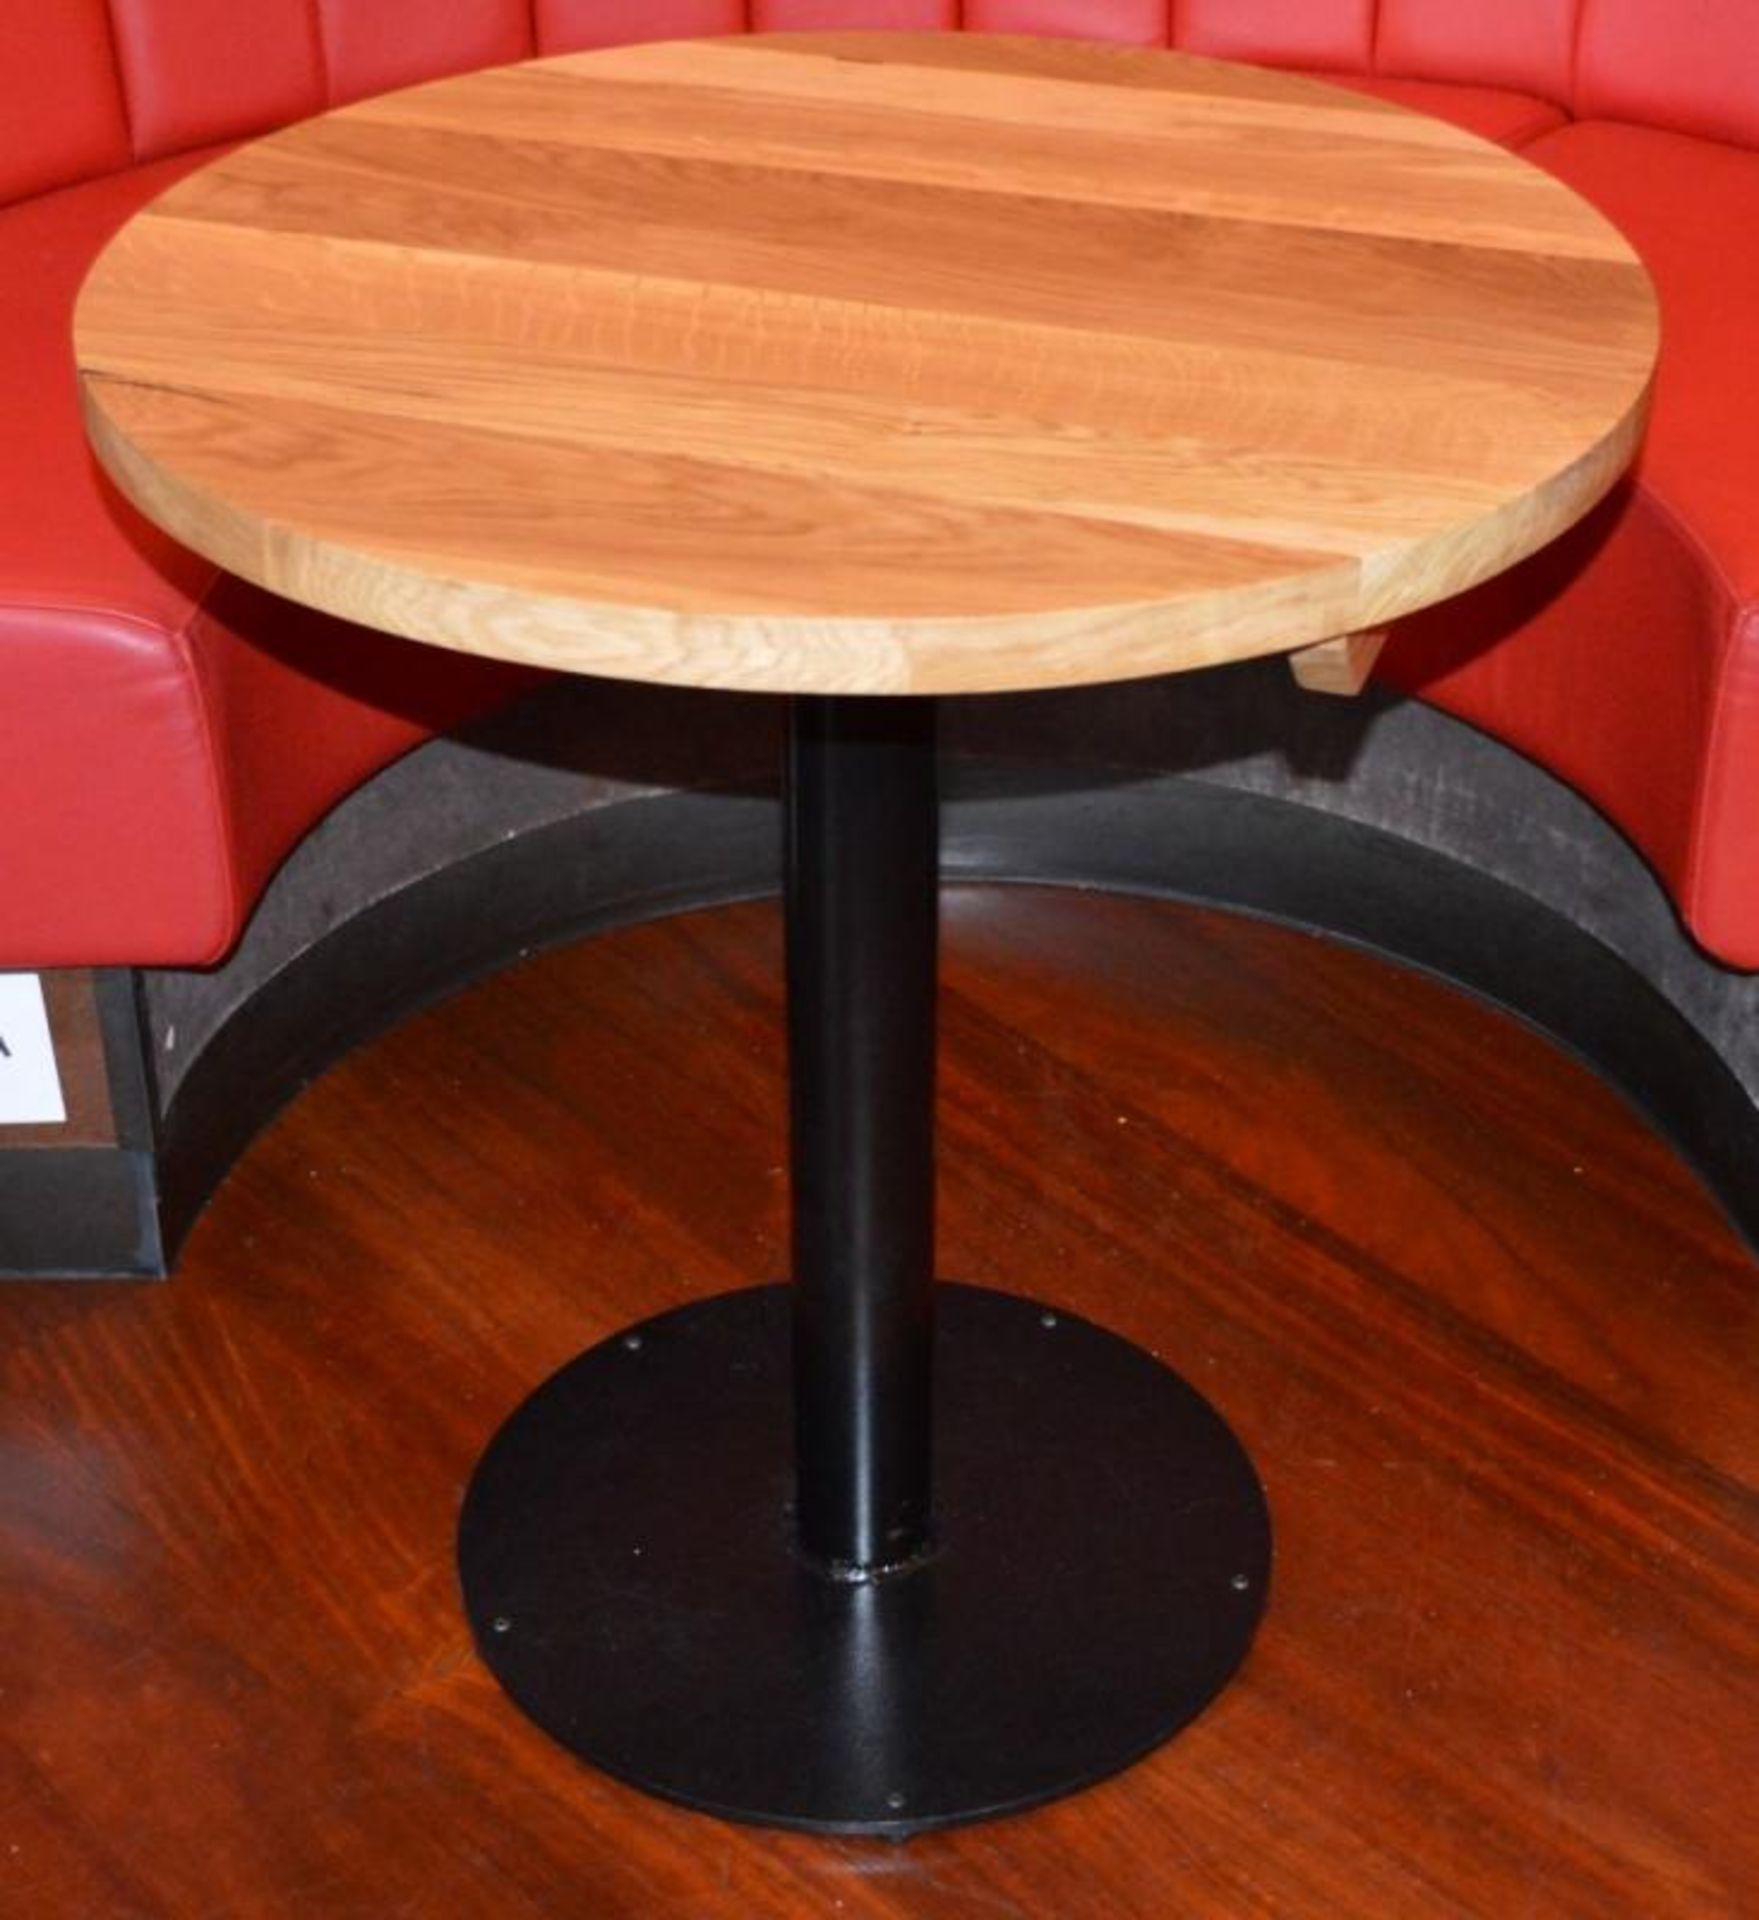 1 x Round Restaurant / Bistro Table - Wooden Topped With A Metal Base - Diameter 80cm / Height 110cm